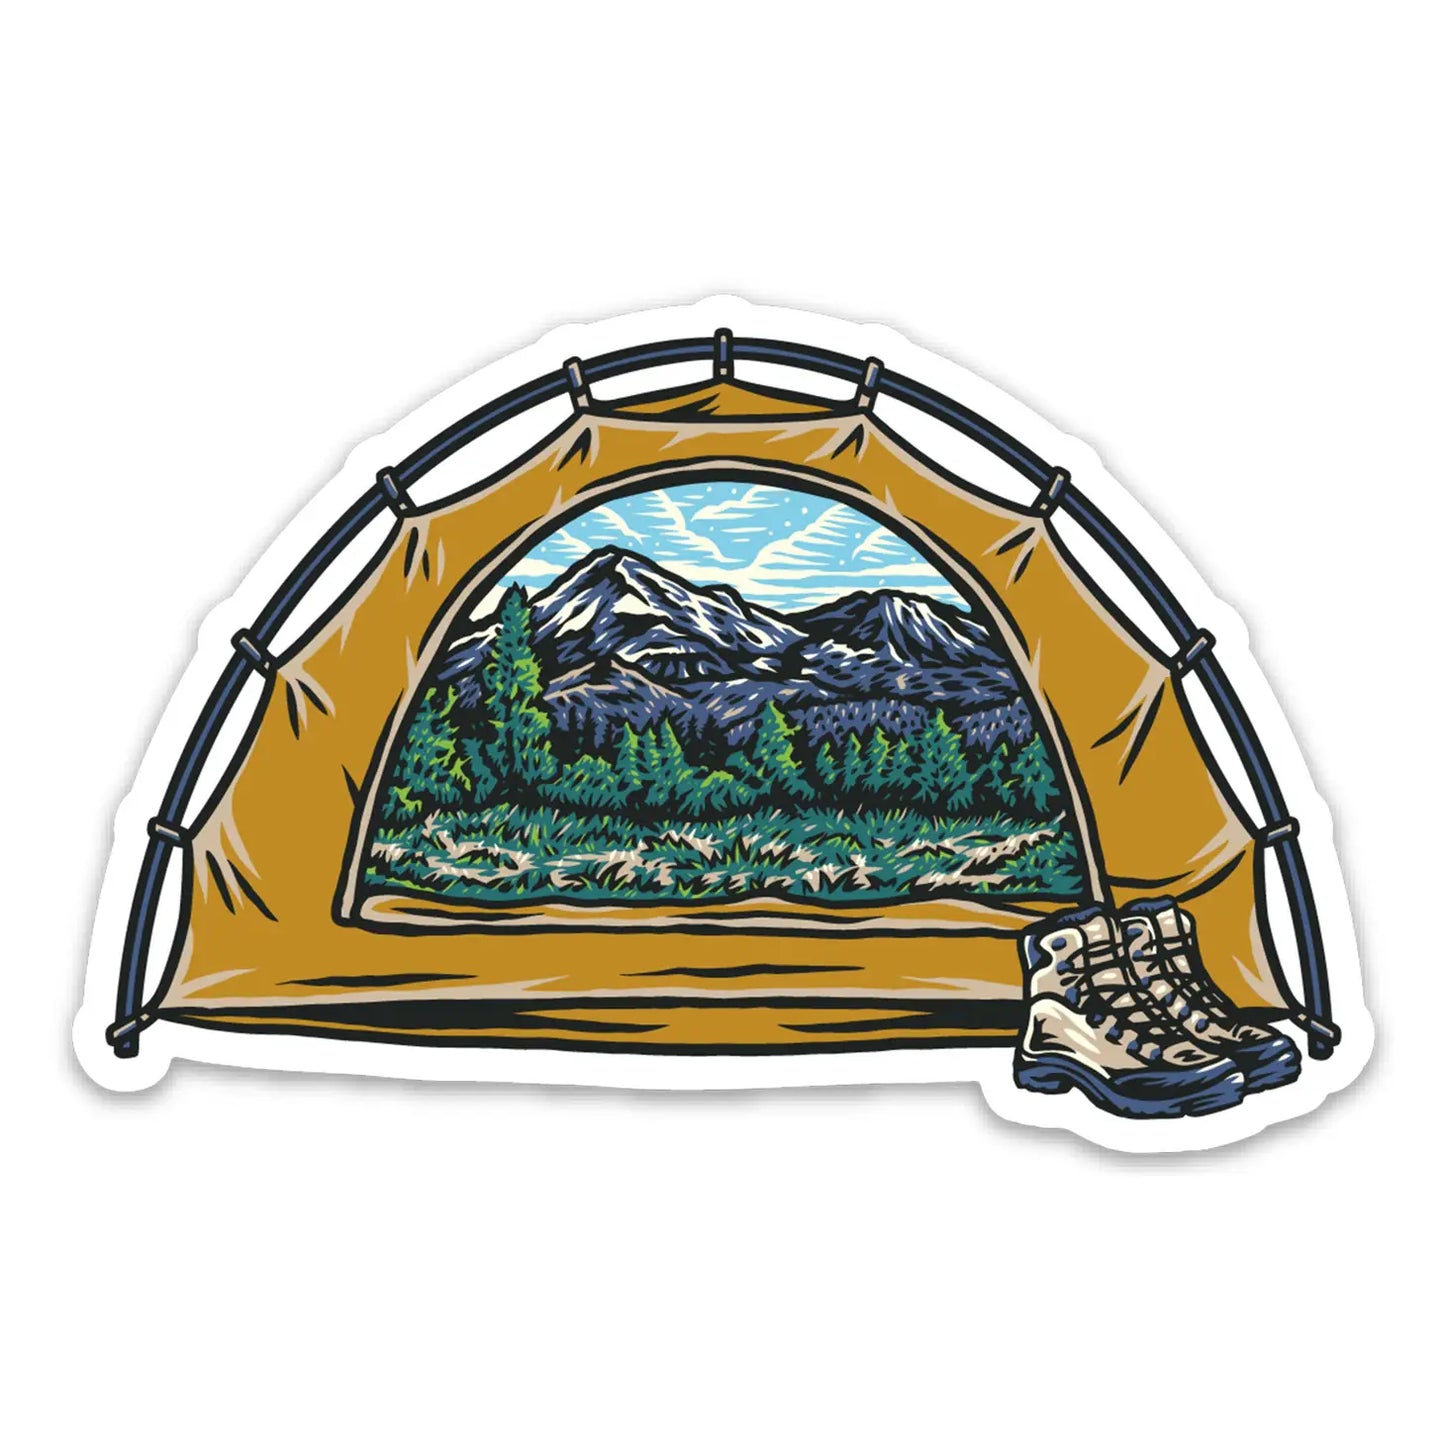 Tent with Mountain View Sticker